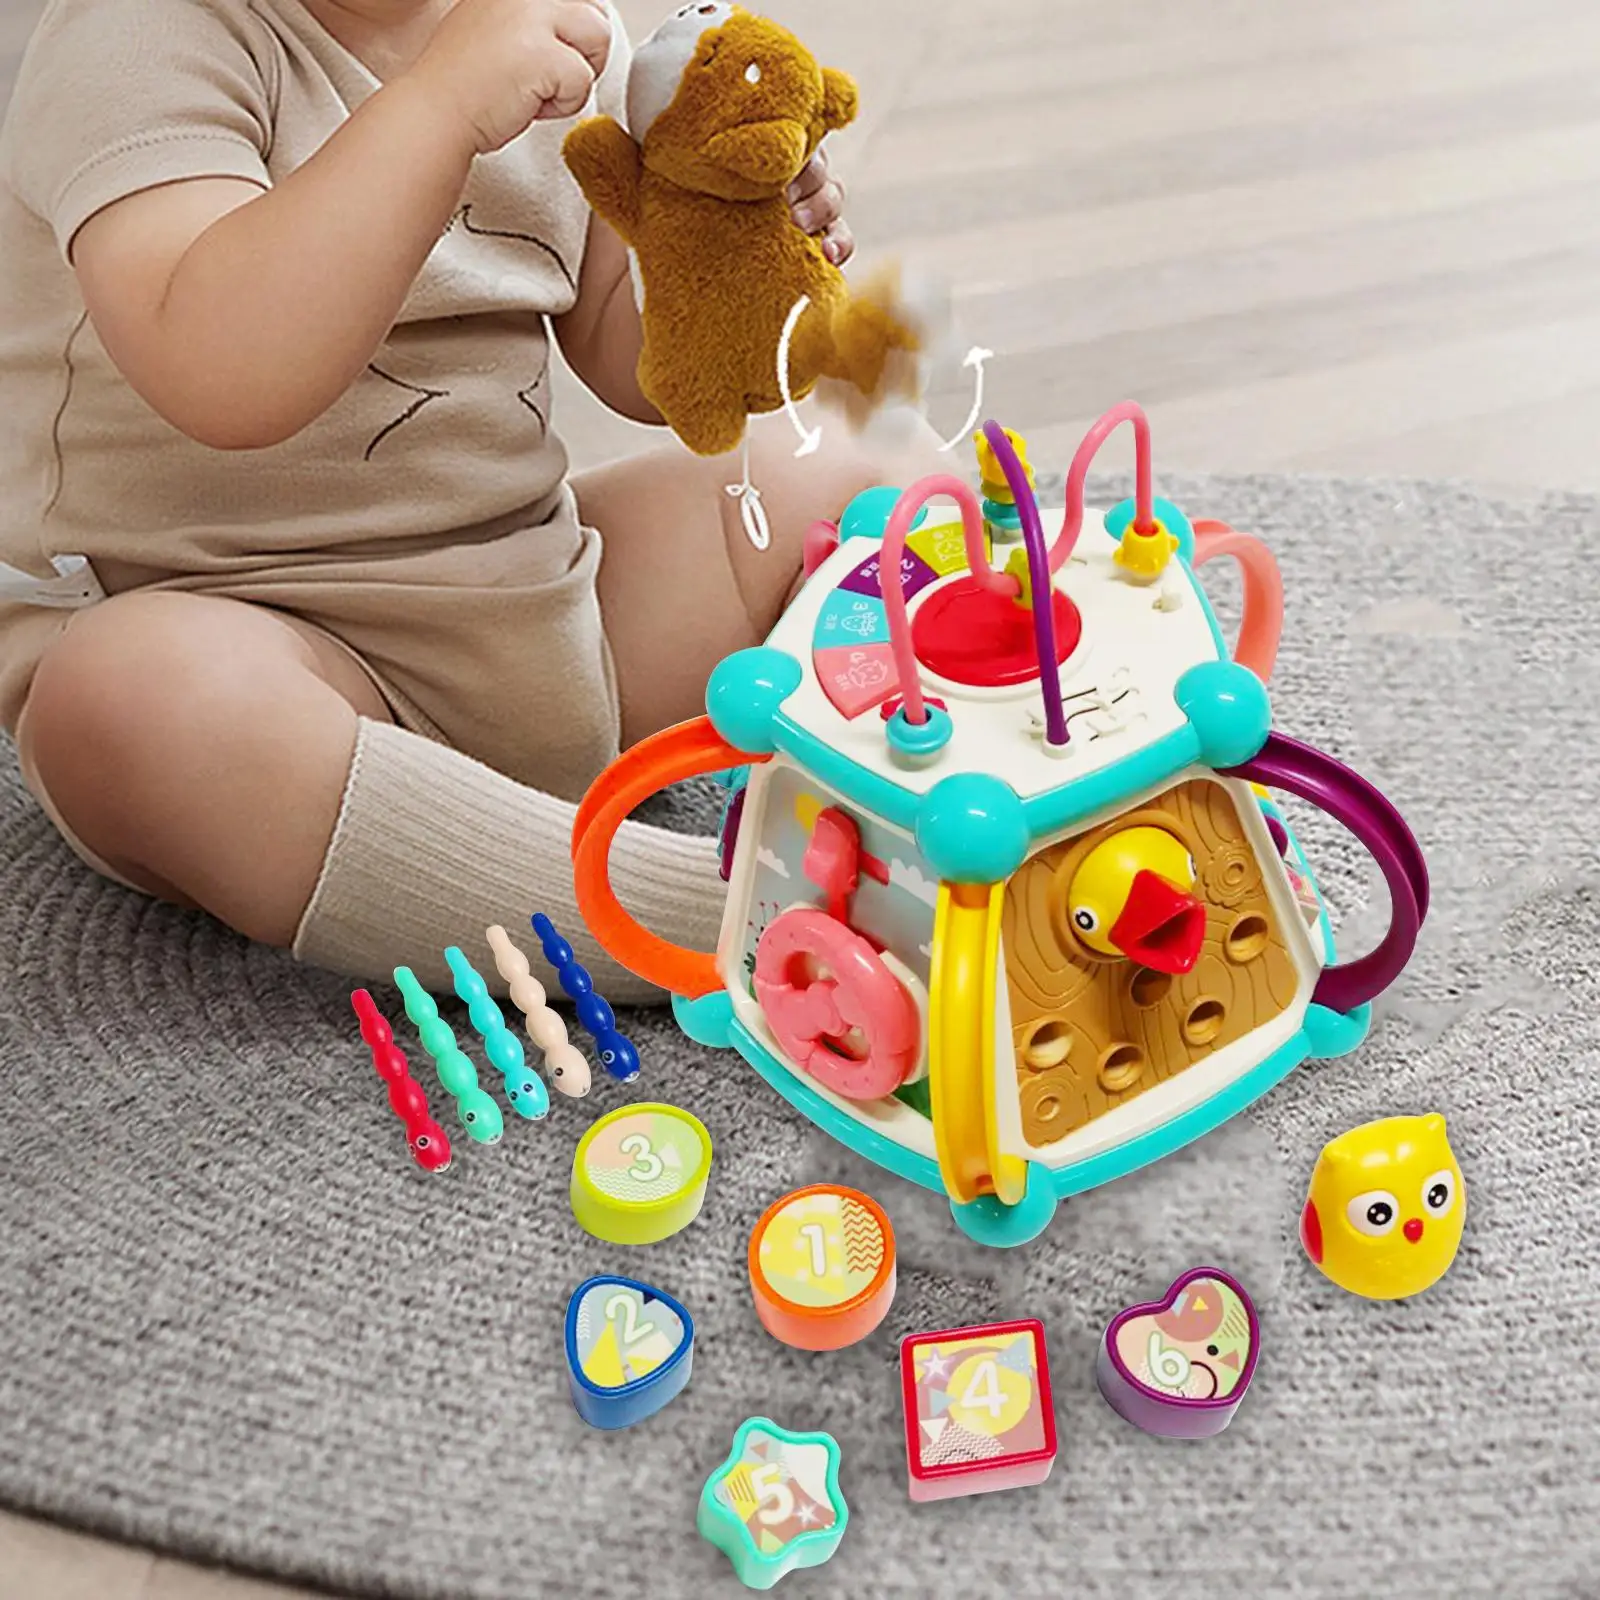 Baby Toy Montessori Development with Lights Multi Functions Activity Cube Toy for Kids 1 Year Olds Toddlers Boys Girls Gift